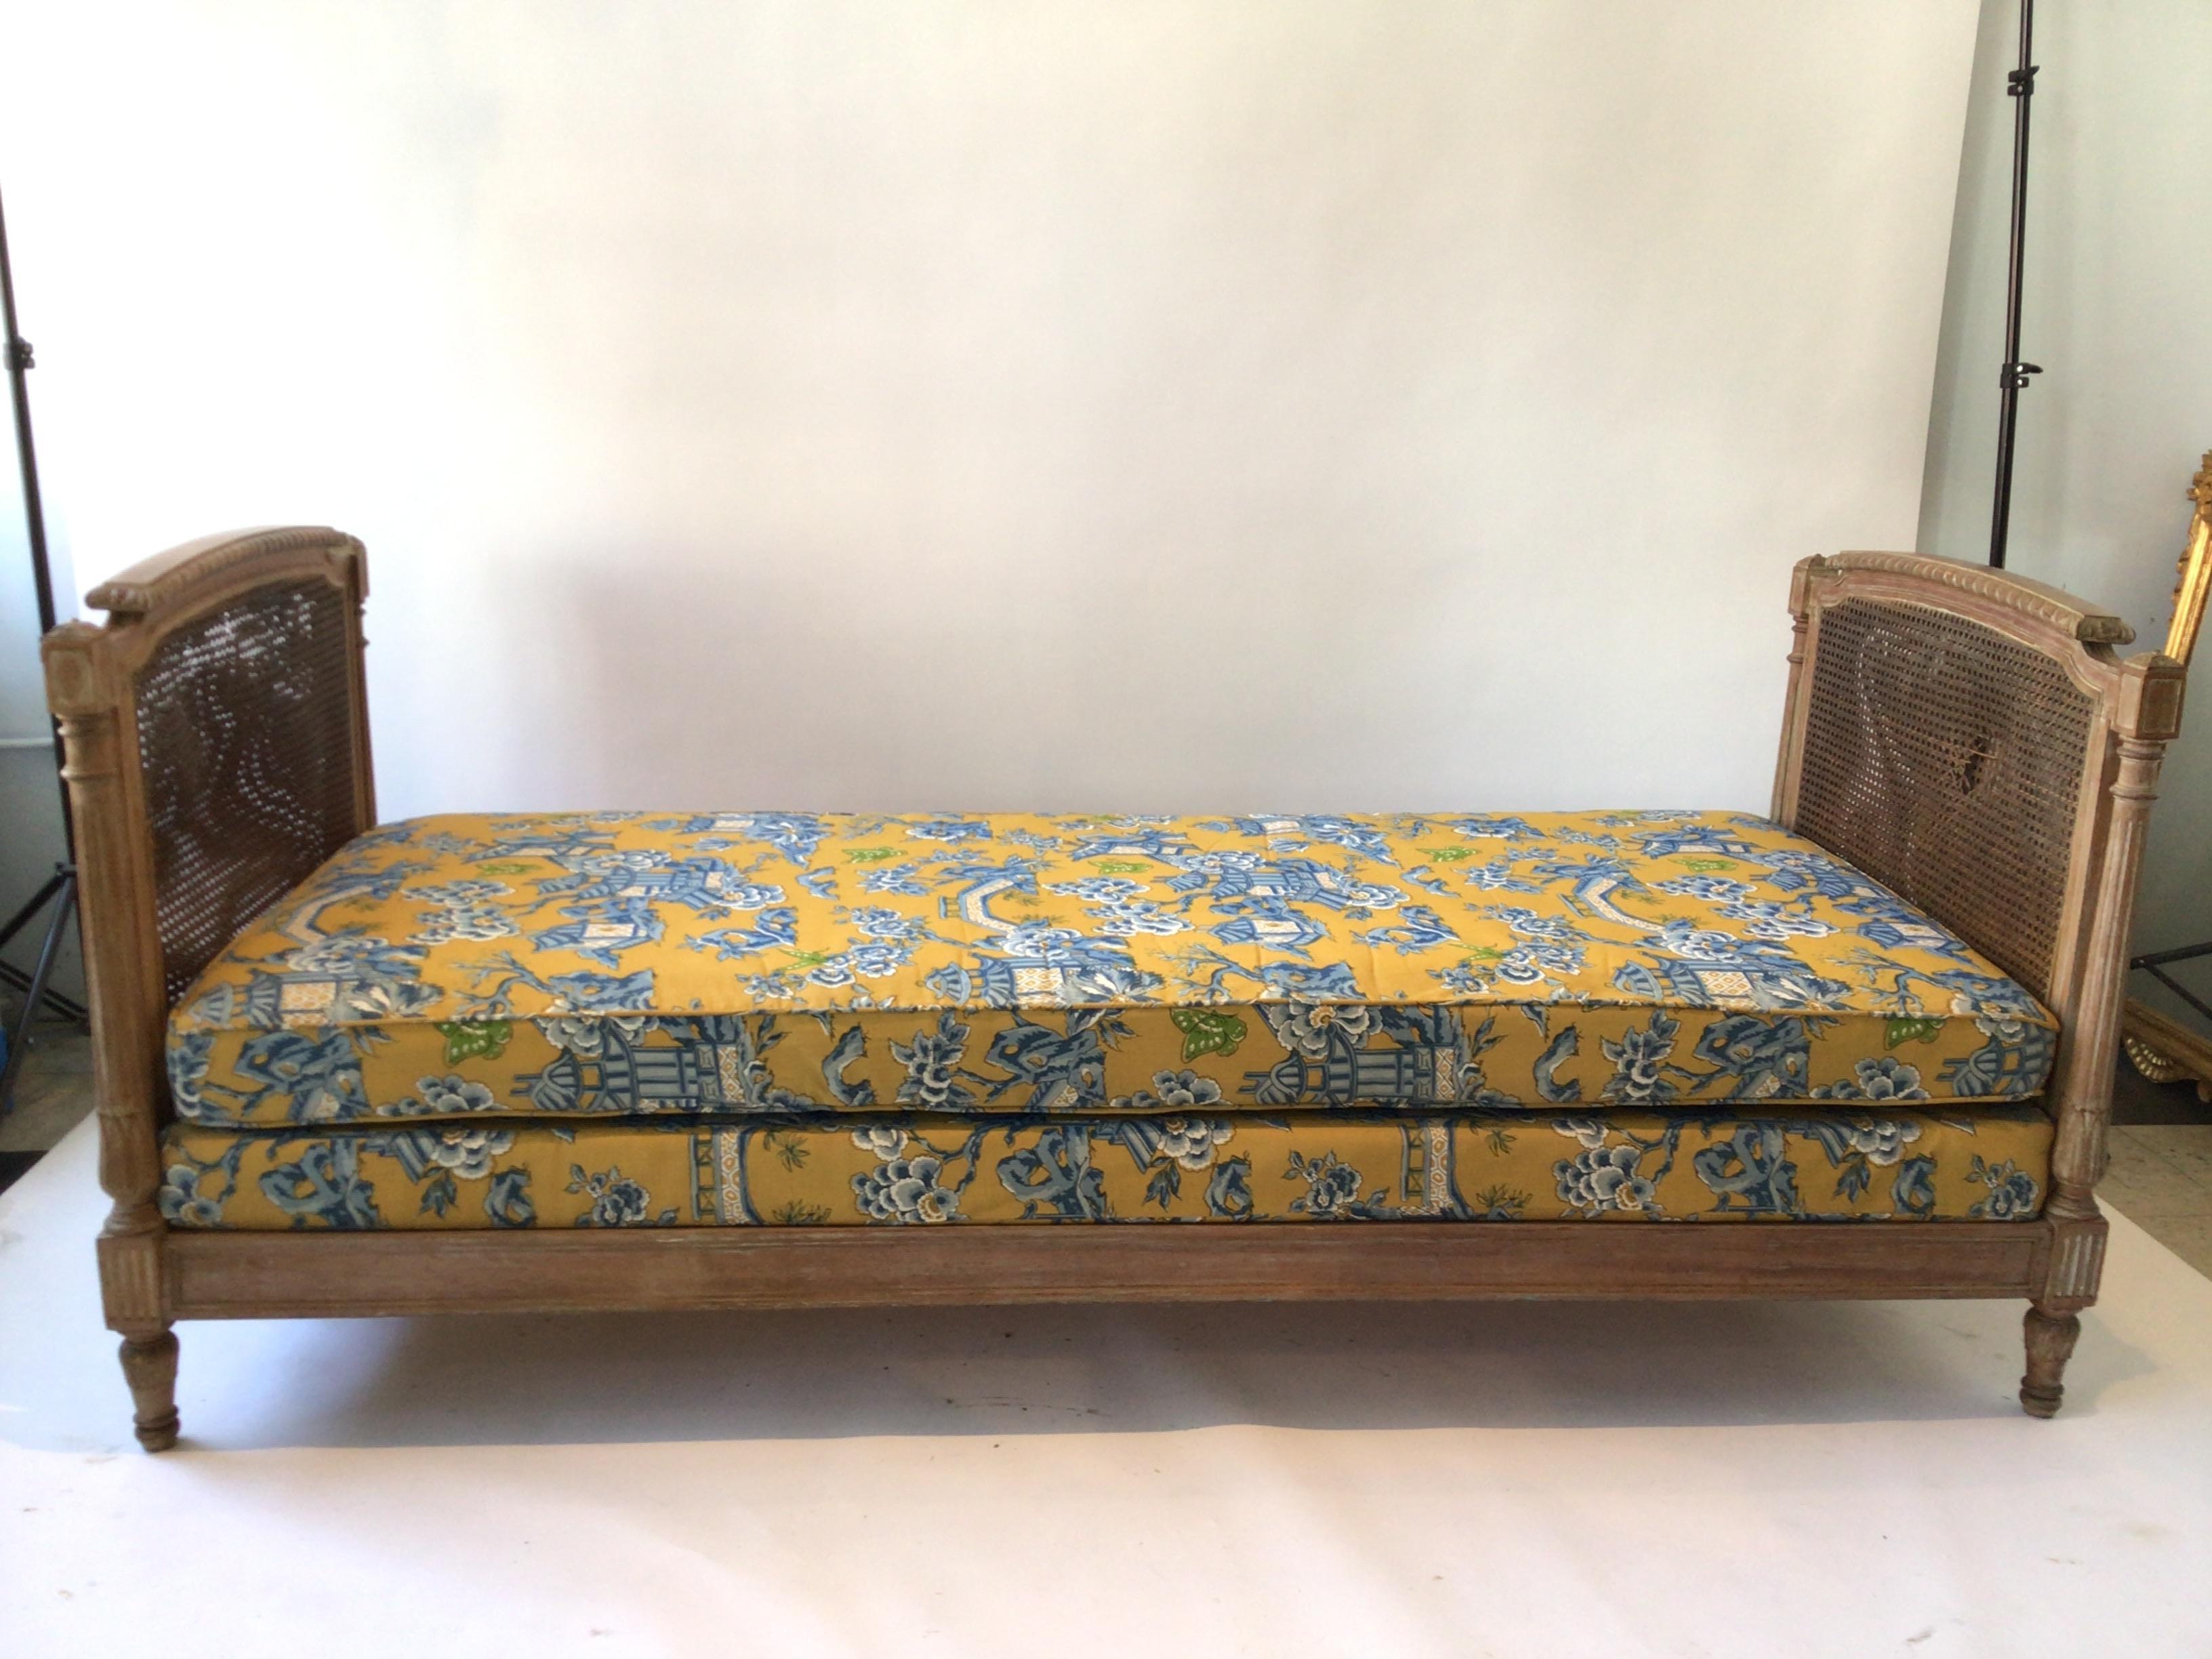 1940s French Louis XVI carved wood daybed. Needs to be reupholstered and needs new caning.